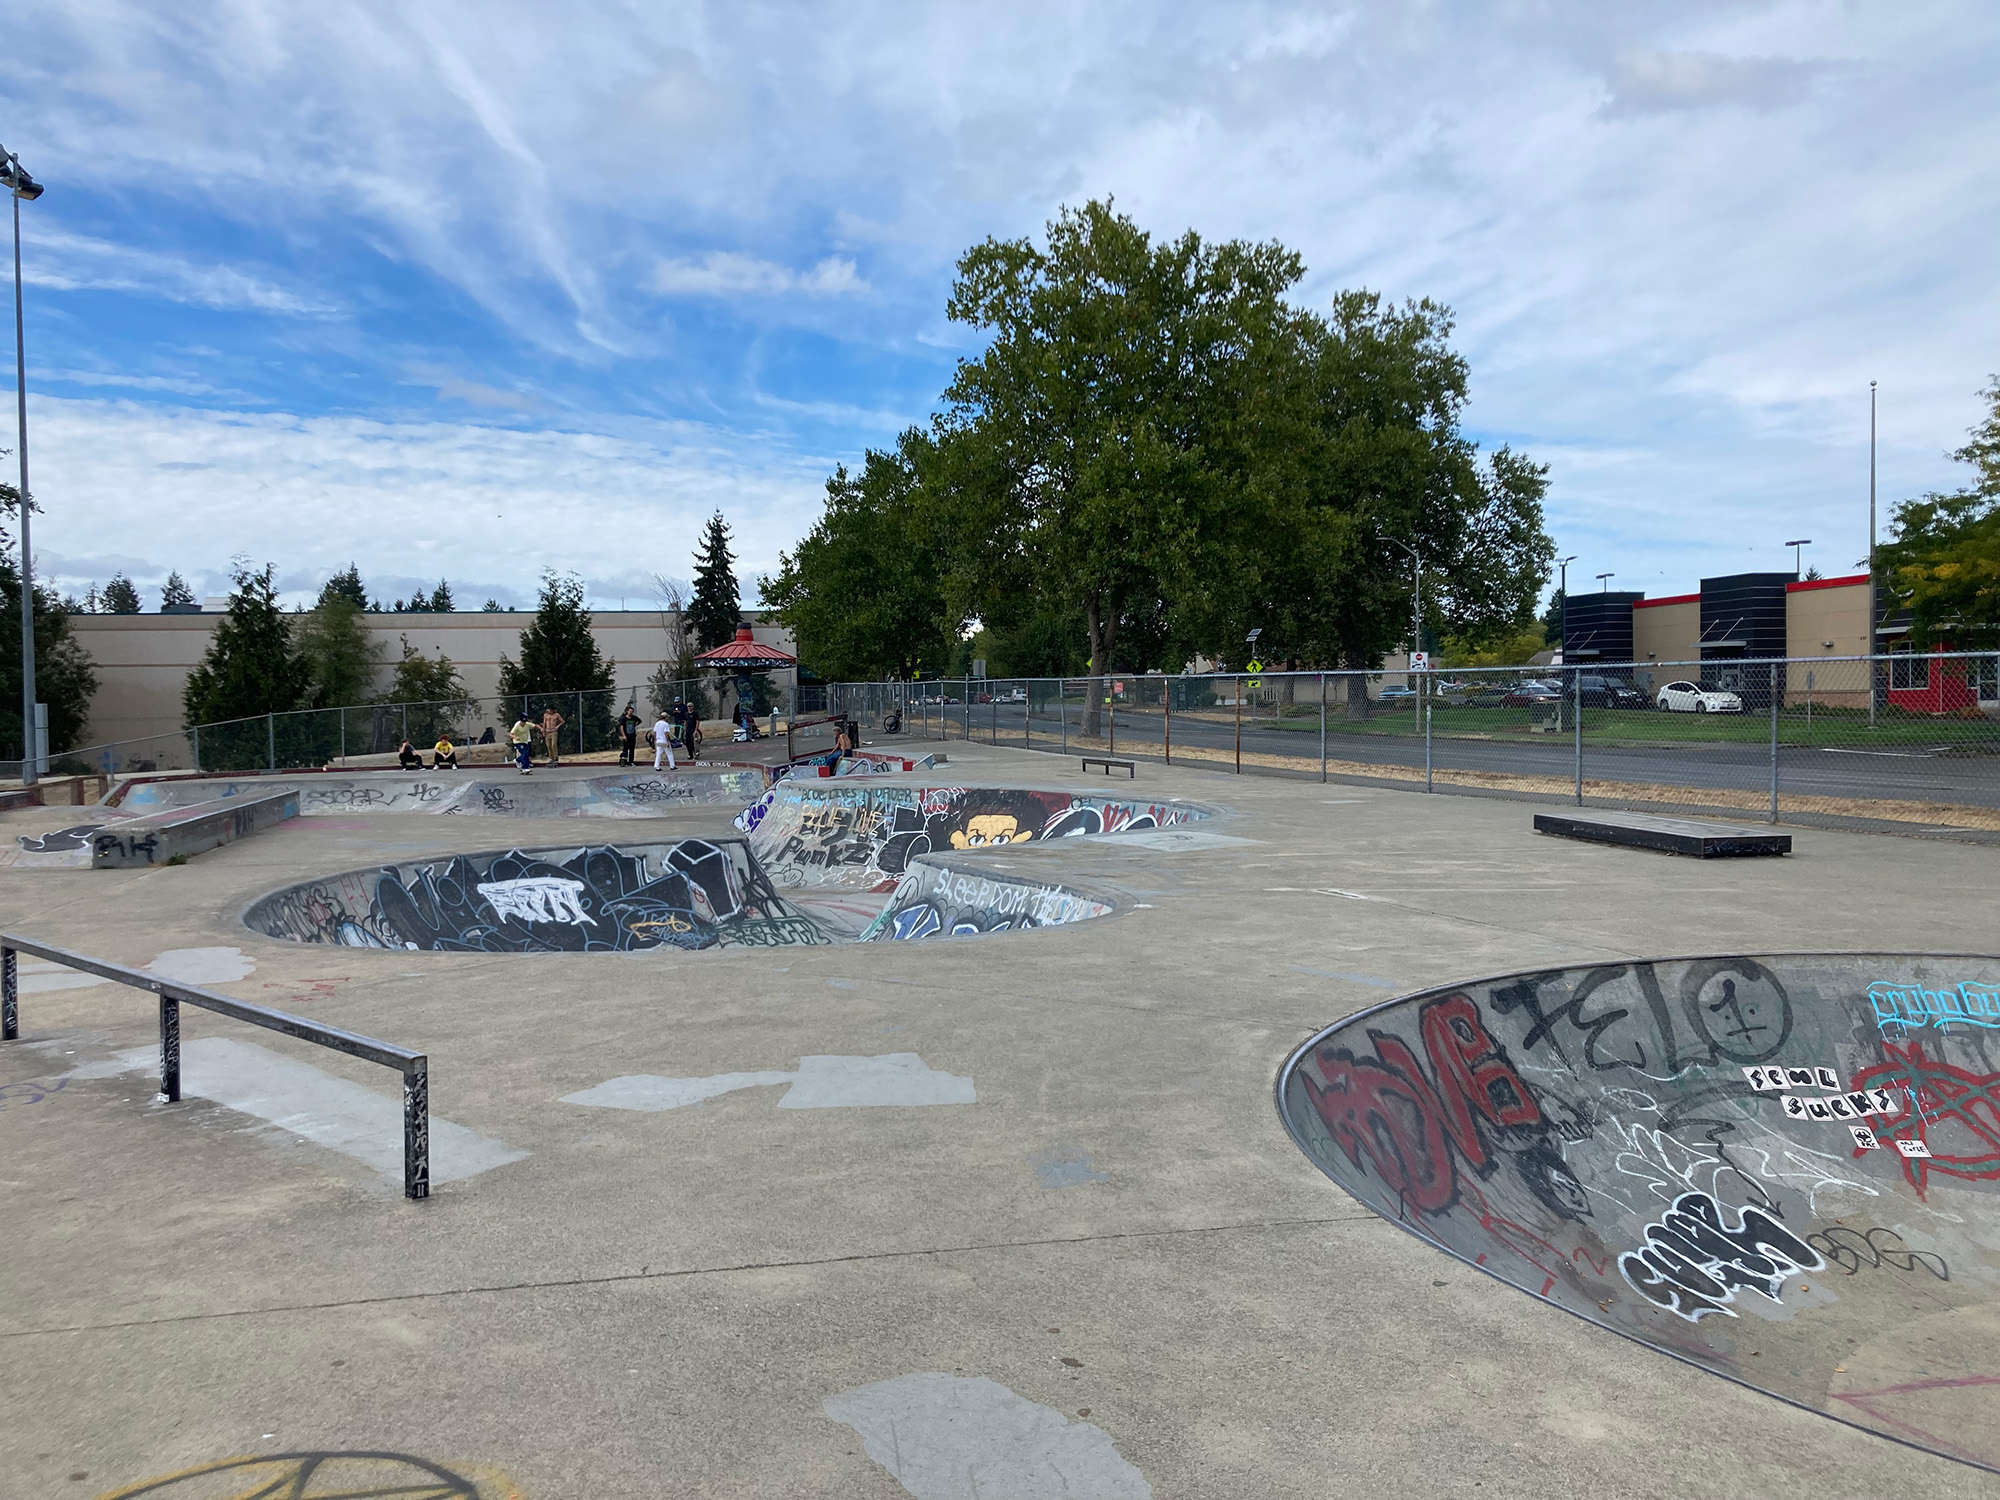 Check Out These Sweet Skate Parks in Olympia and Throughout